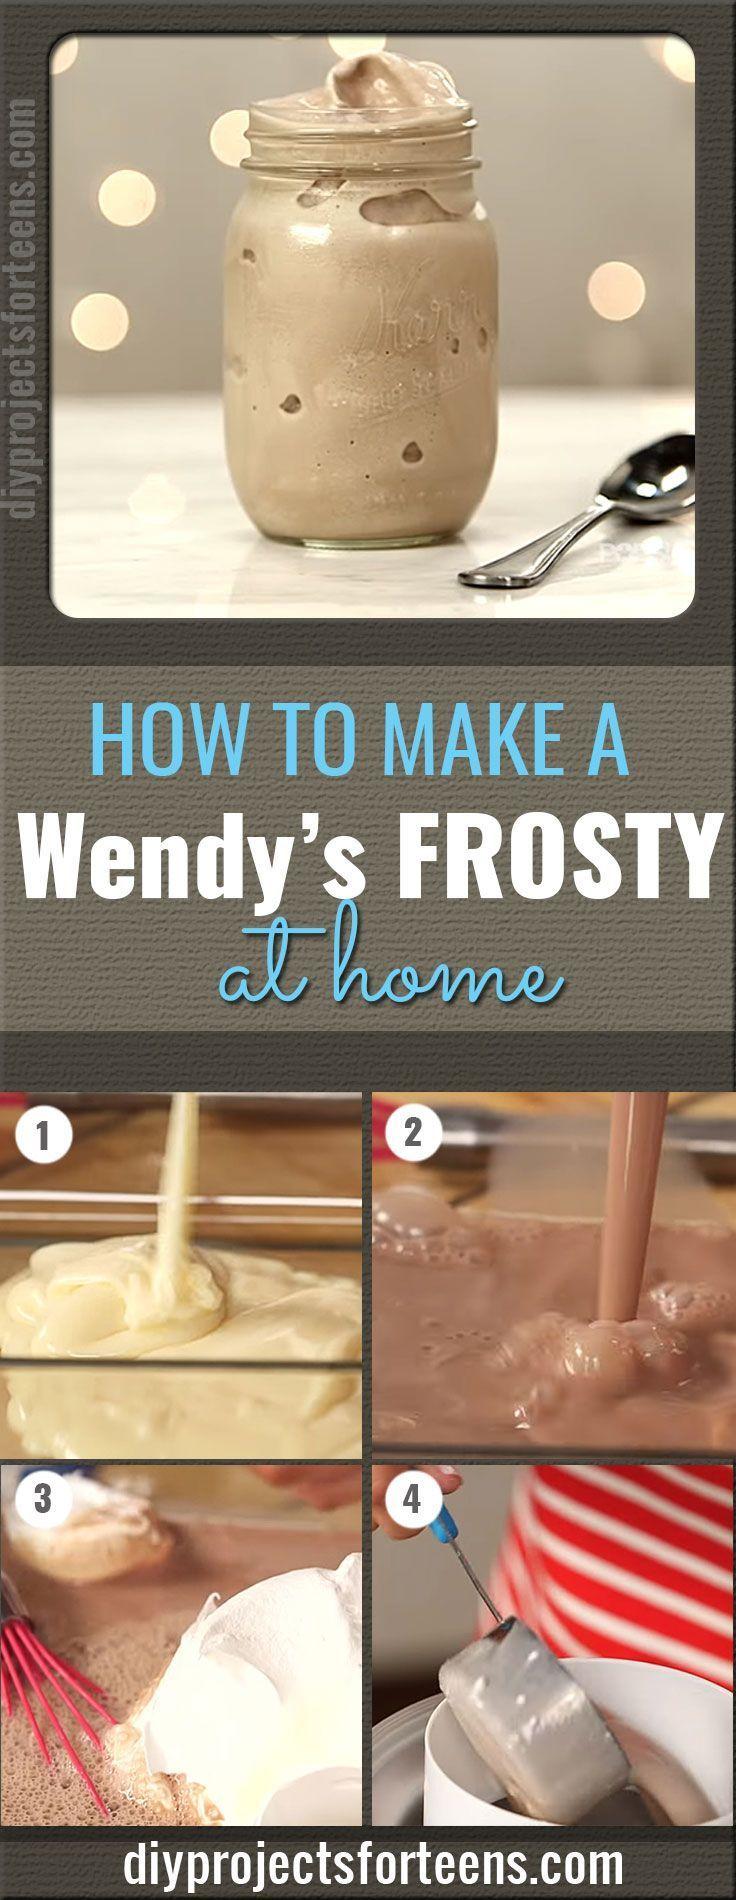 Wedding - Make A Wendy's Frosty At Home With Only 3 Ingredients